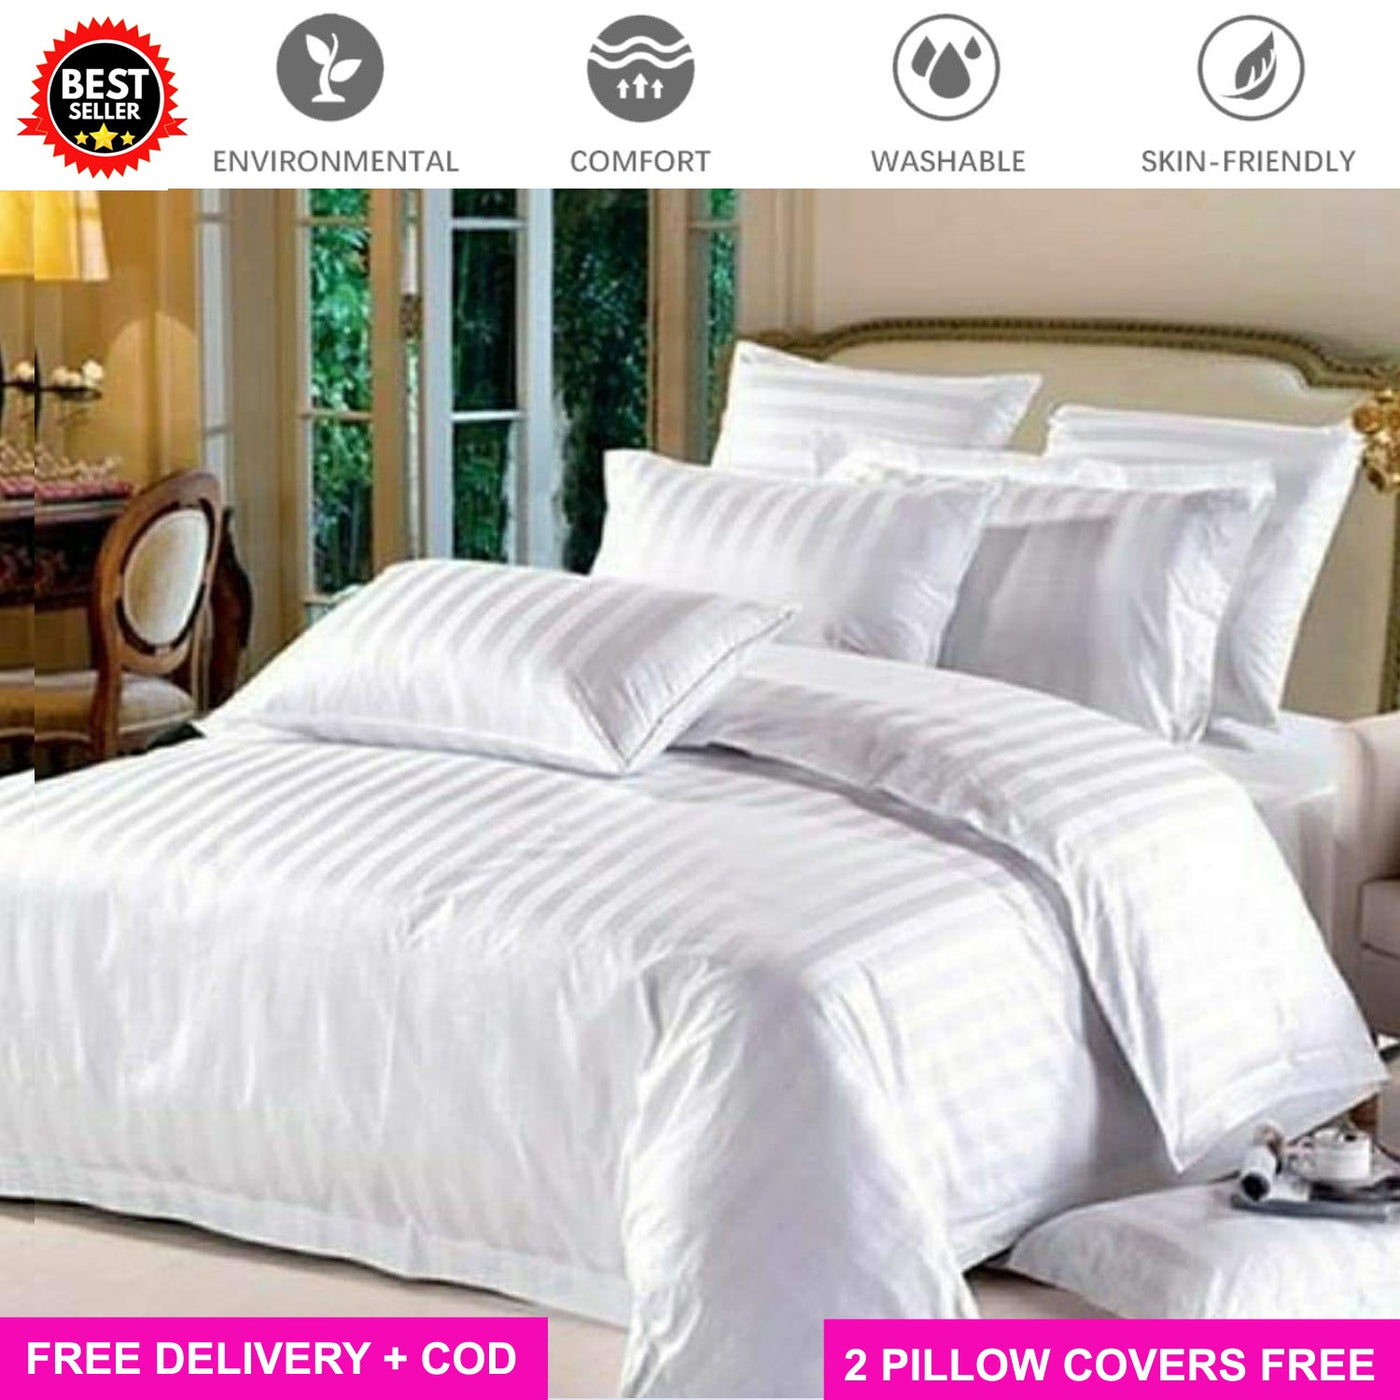 Cotton Elastic Fitted King Size Bedsheet with 2 Pillow Covers - Fits with any Beds & Mattresses Great Happy IN Plain White KING SIZE 